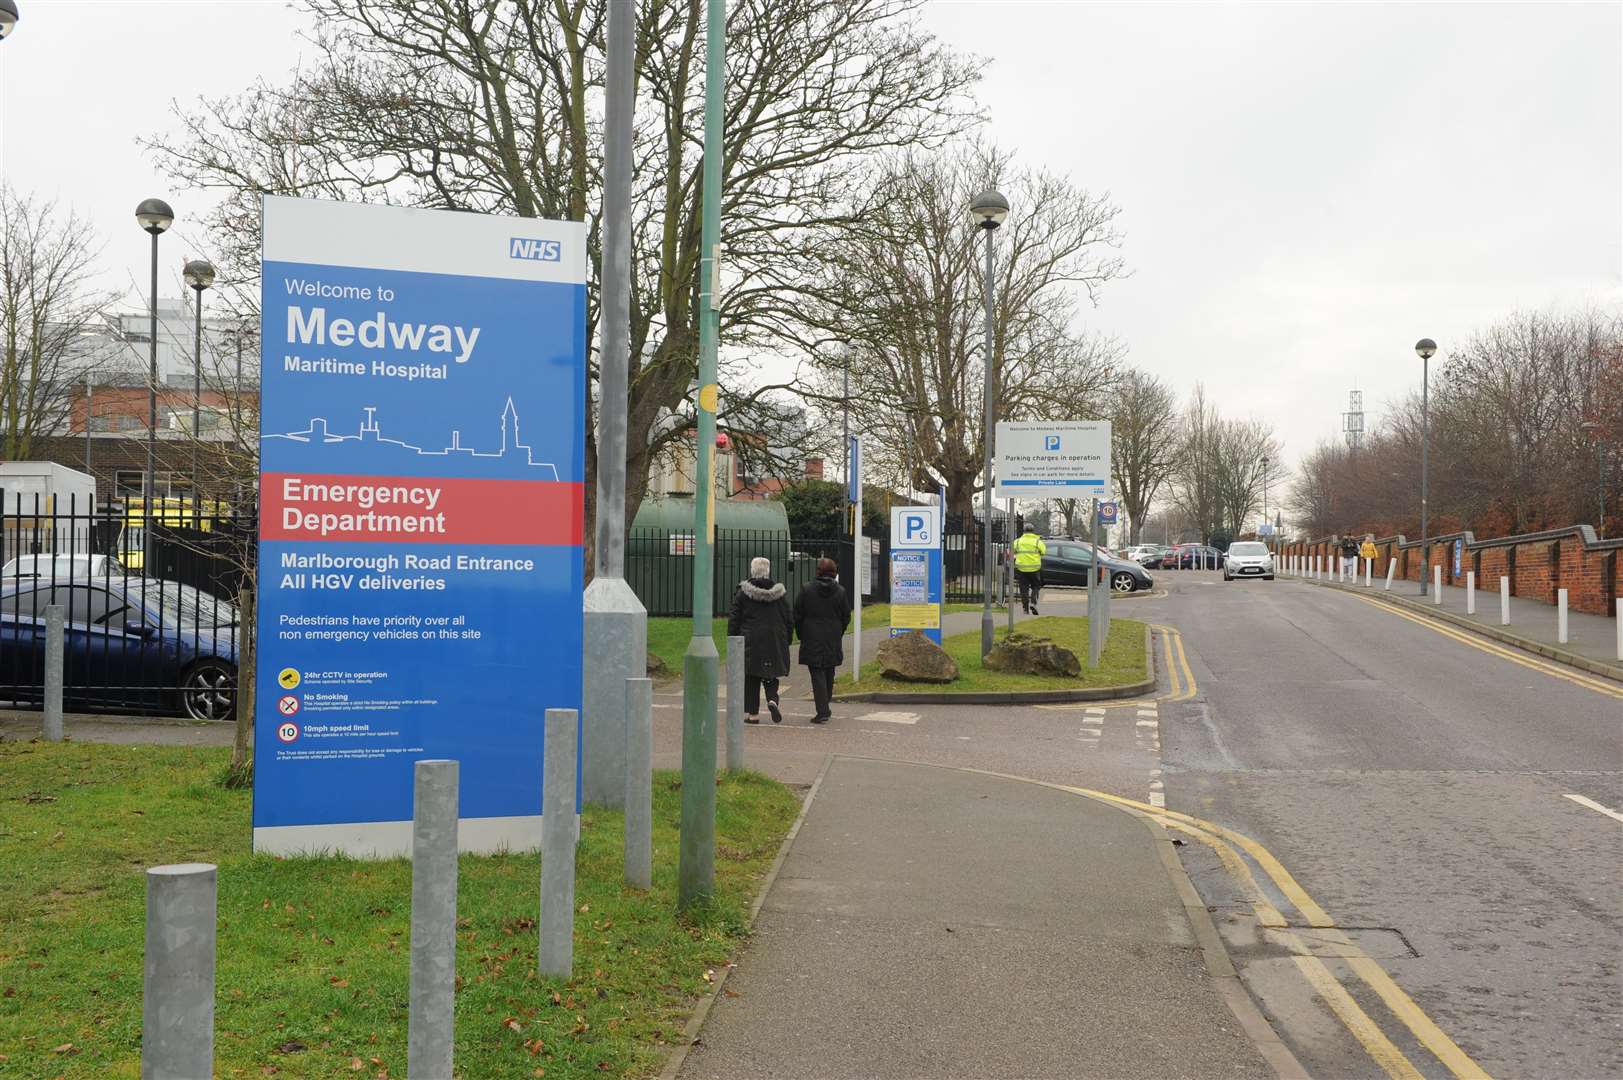 The outbreak is at Medway Maritime Hospital